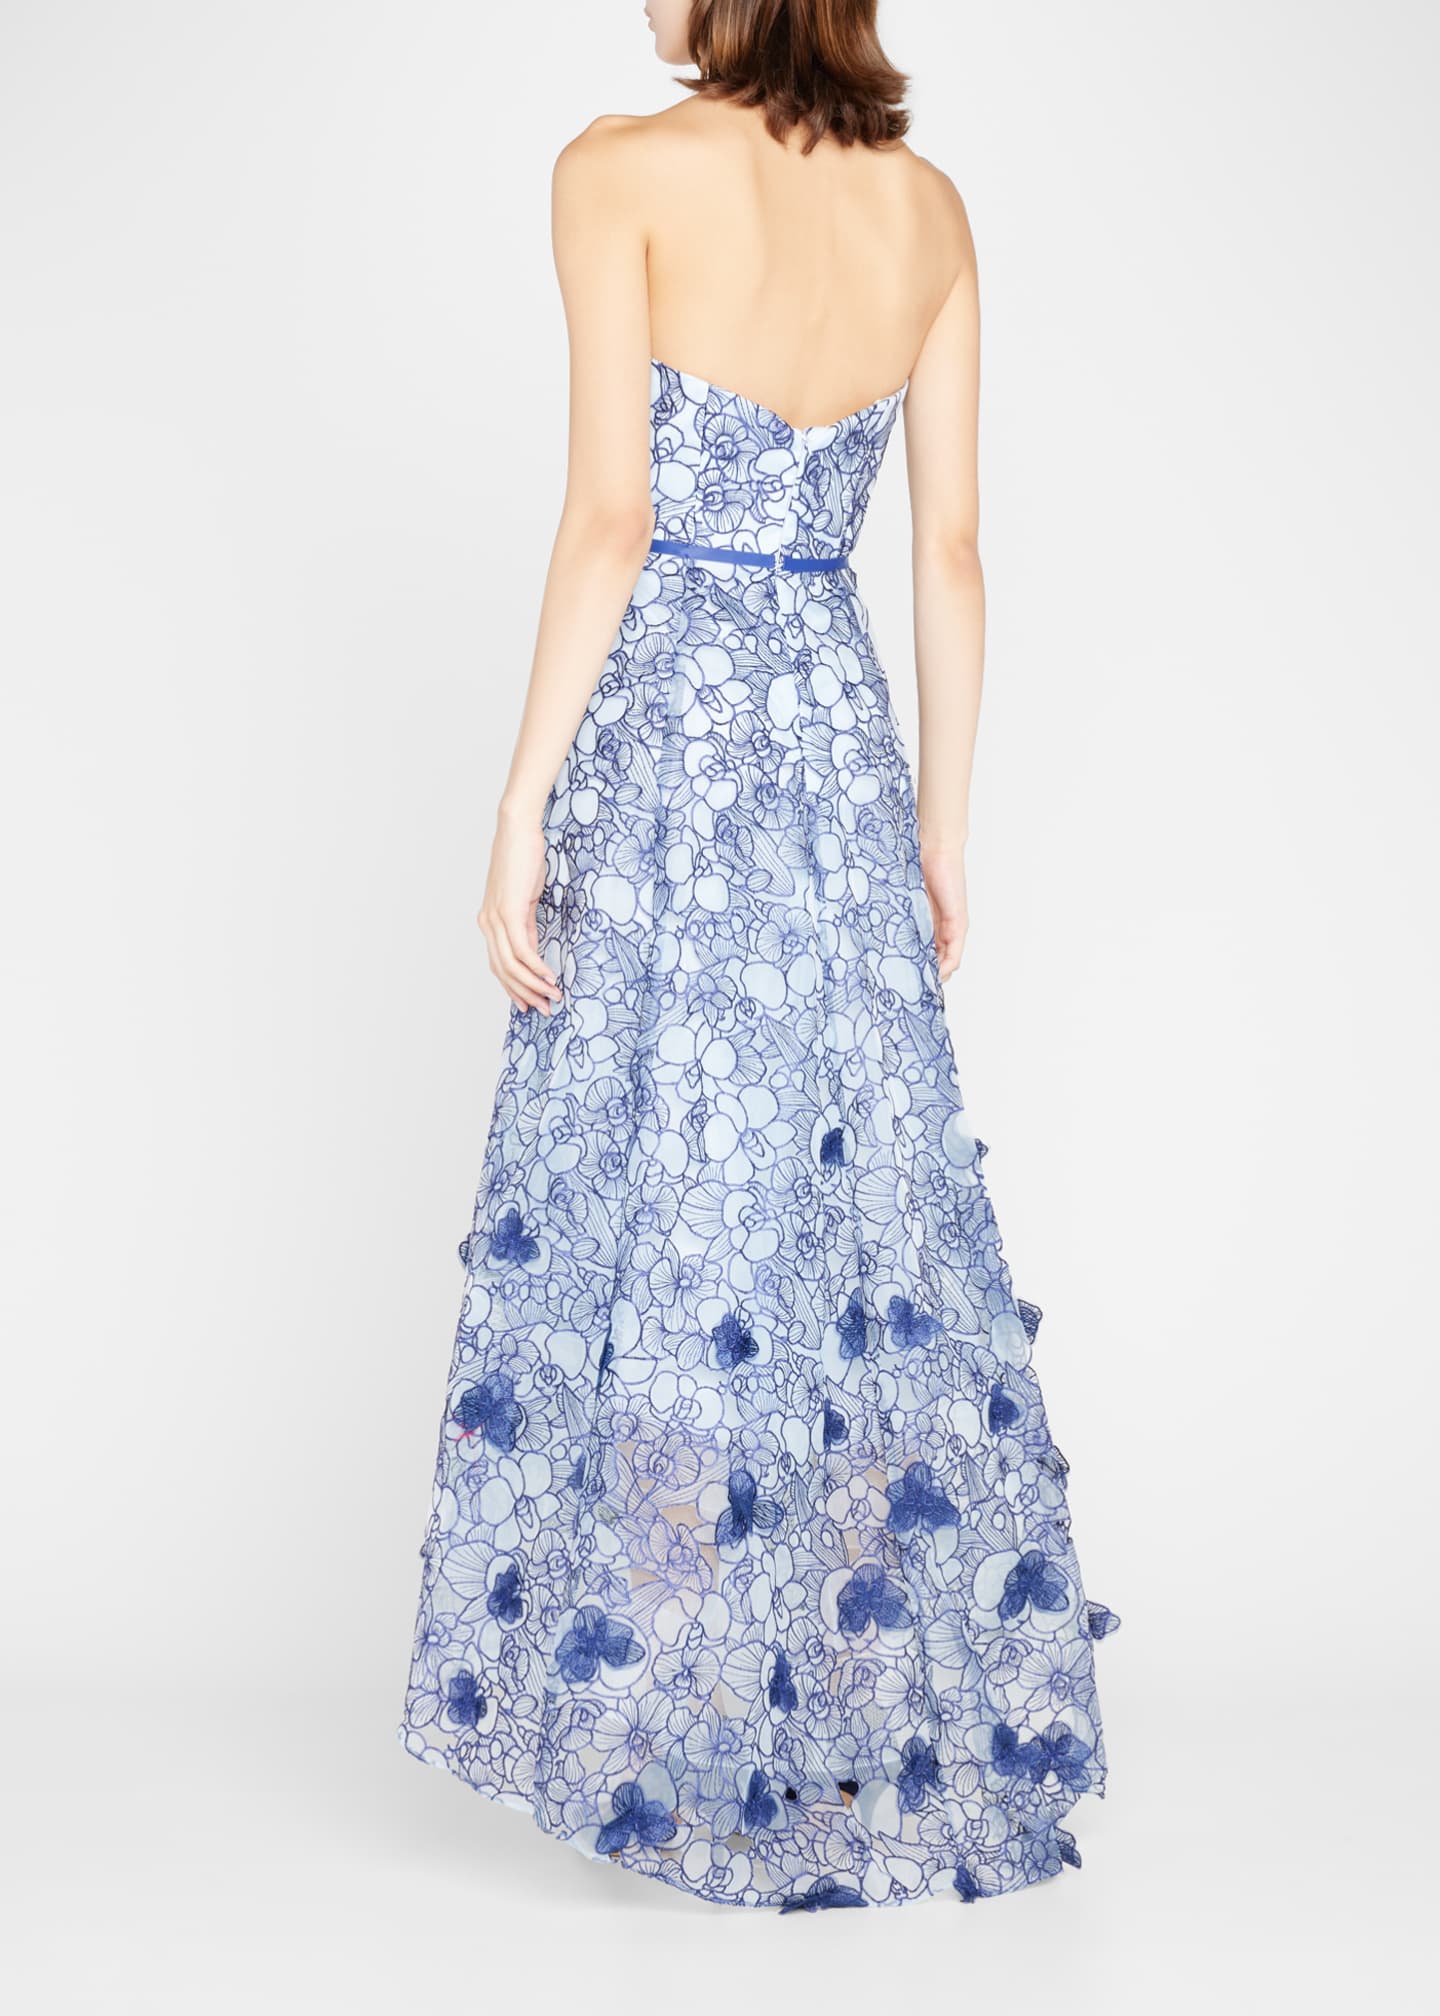 Marchesa Notte Strapless Embroidered High-Low Gown - Bergdorf Goodman